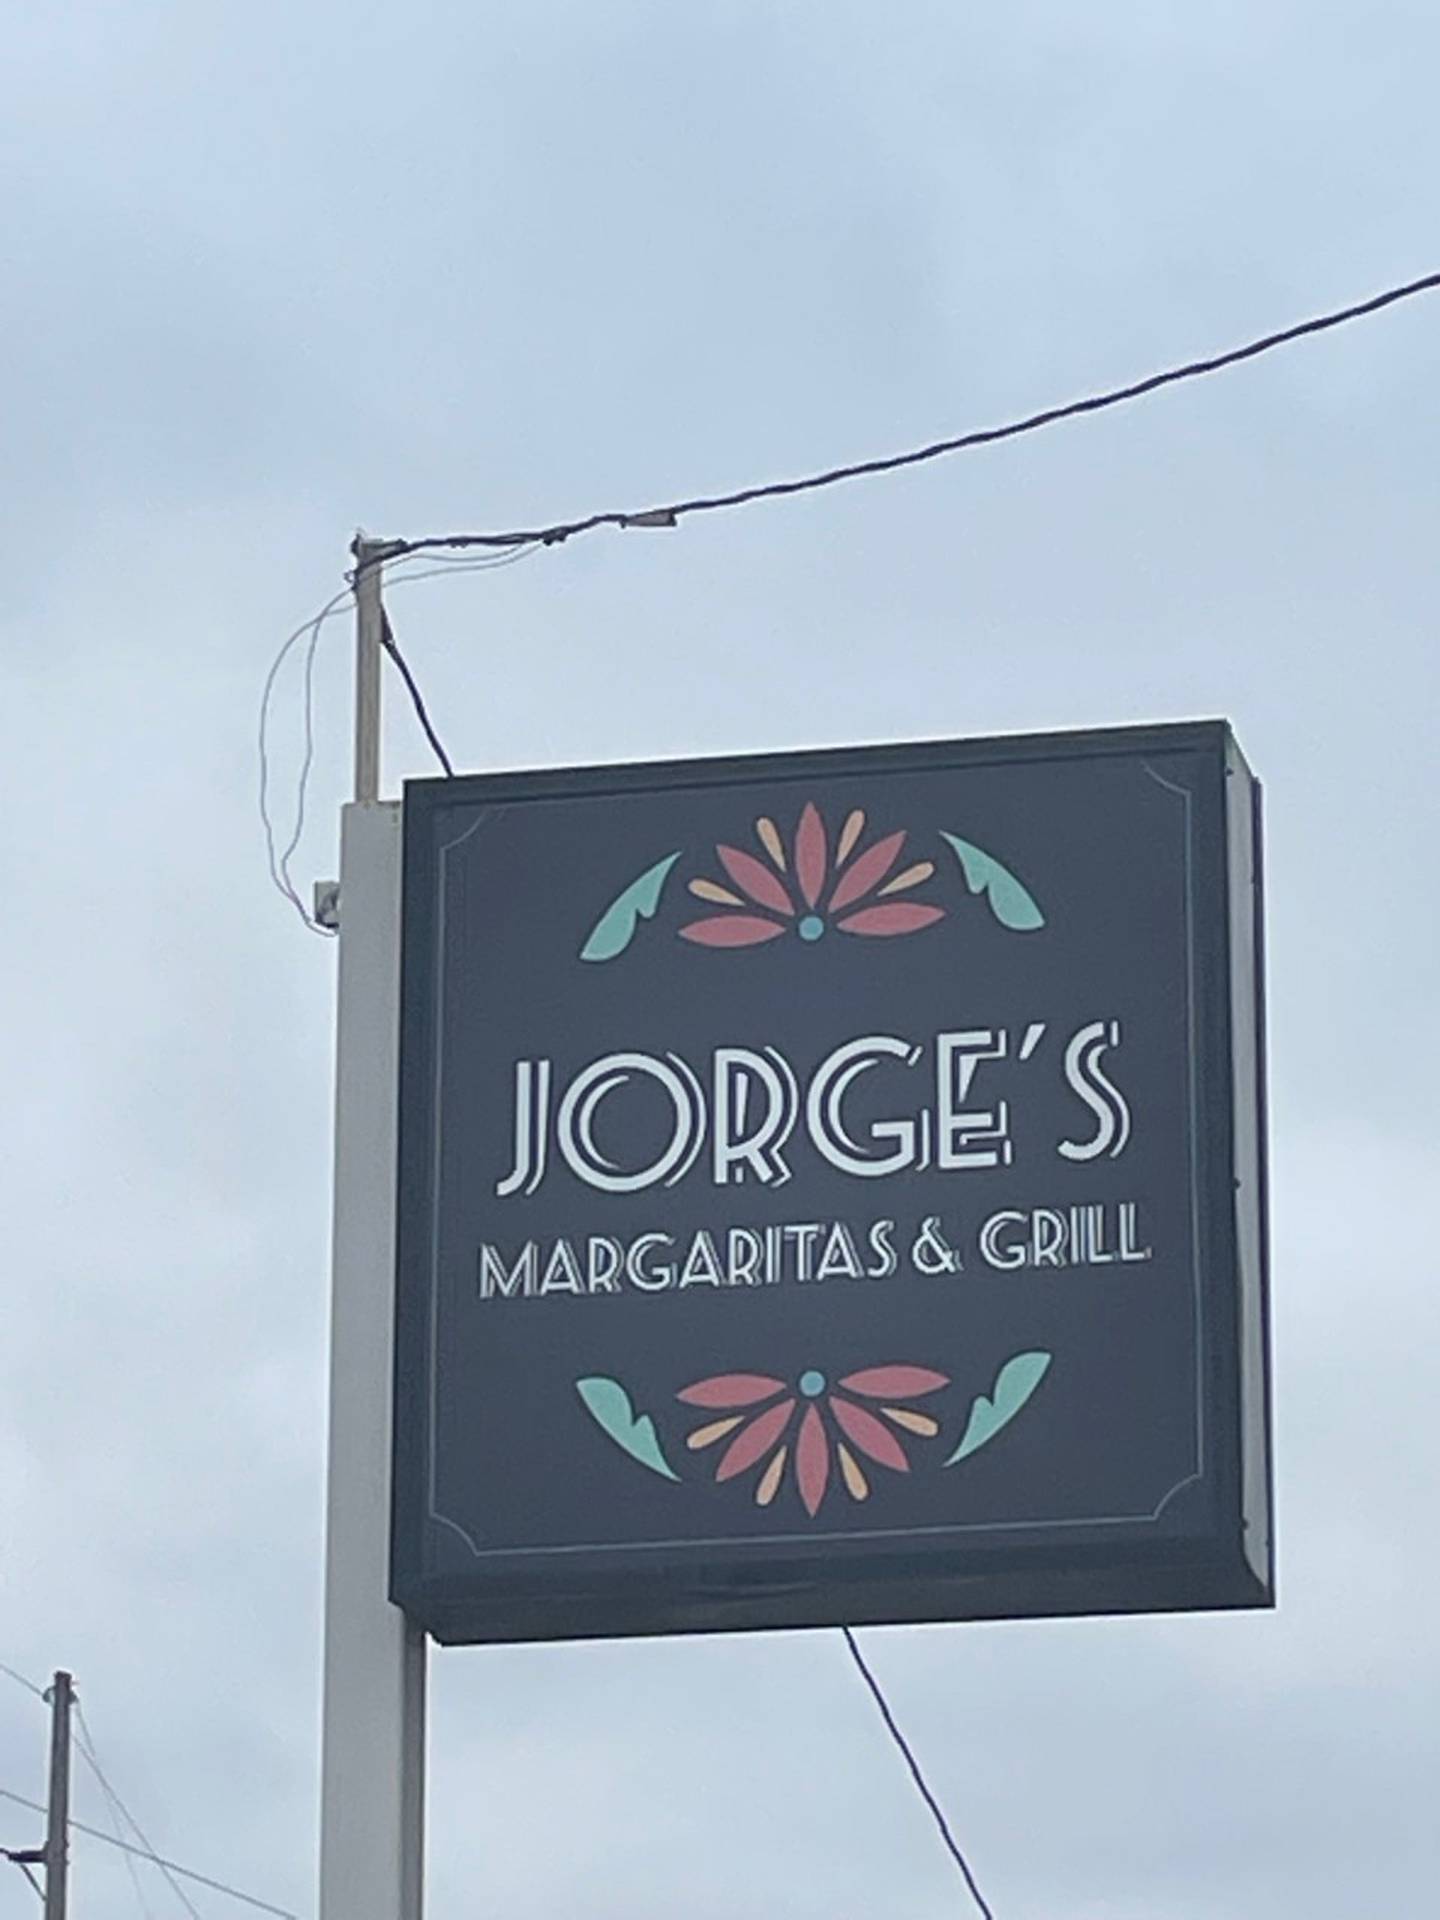 La Salle's competitive dining scene has added a new Mexican restaurant. Jorge's Margaritas & Grill has taken up residence in the former Monari's 101 Club and still offers local staples such as fried chicken, ribeye and pork tenderloin sandwiches in addition to Mexican cuisine.